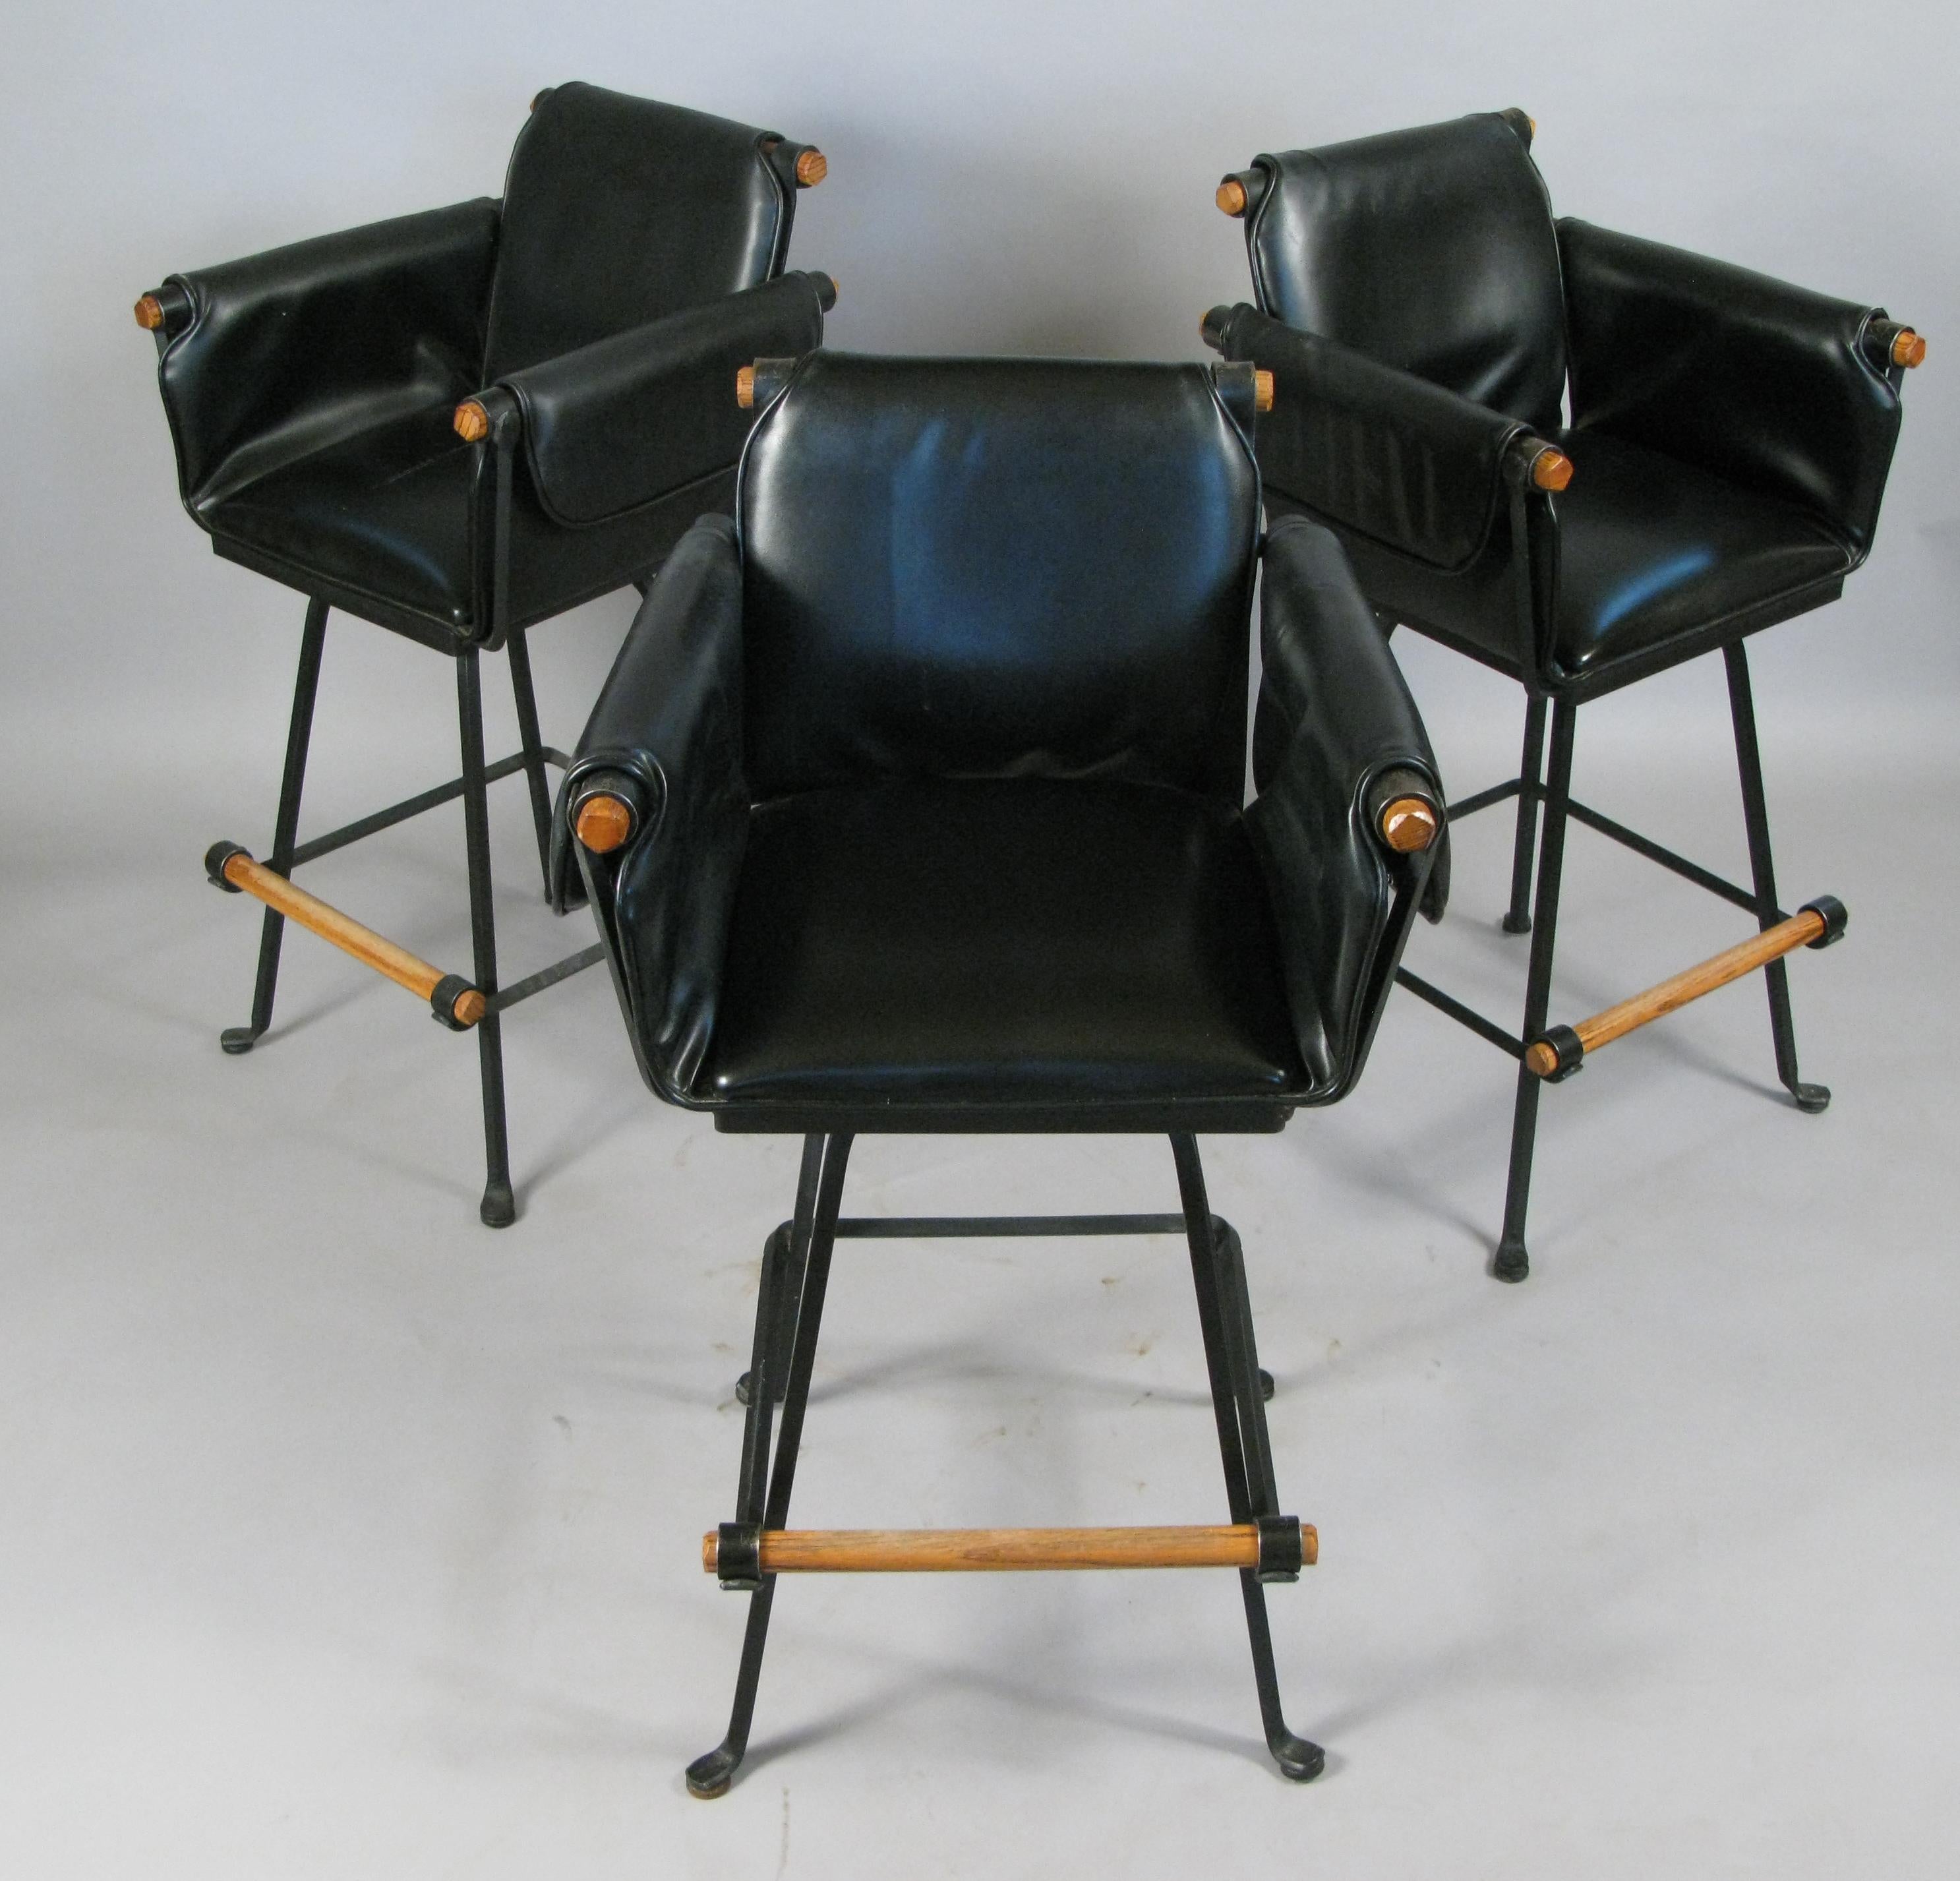 A beautiful set of three vintage 1970s swivel barstools with wrought iron frames and oak arms and footrests. With their original black vinyl upholstered seats and arms. Labeled Terra Furniture.